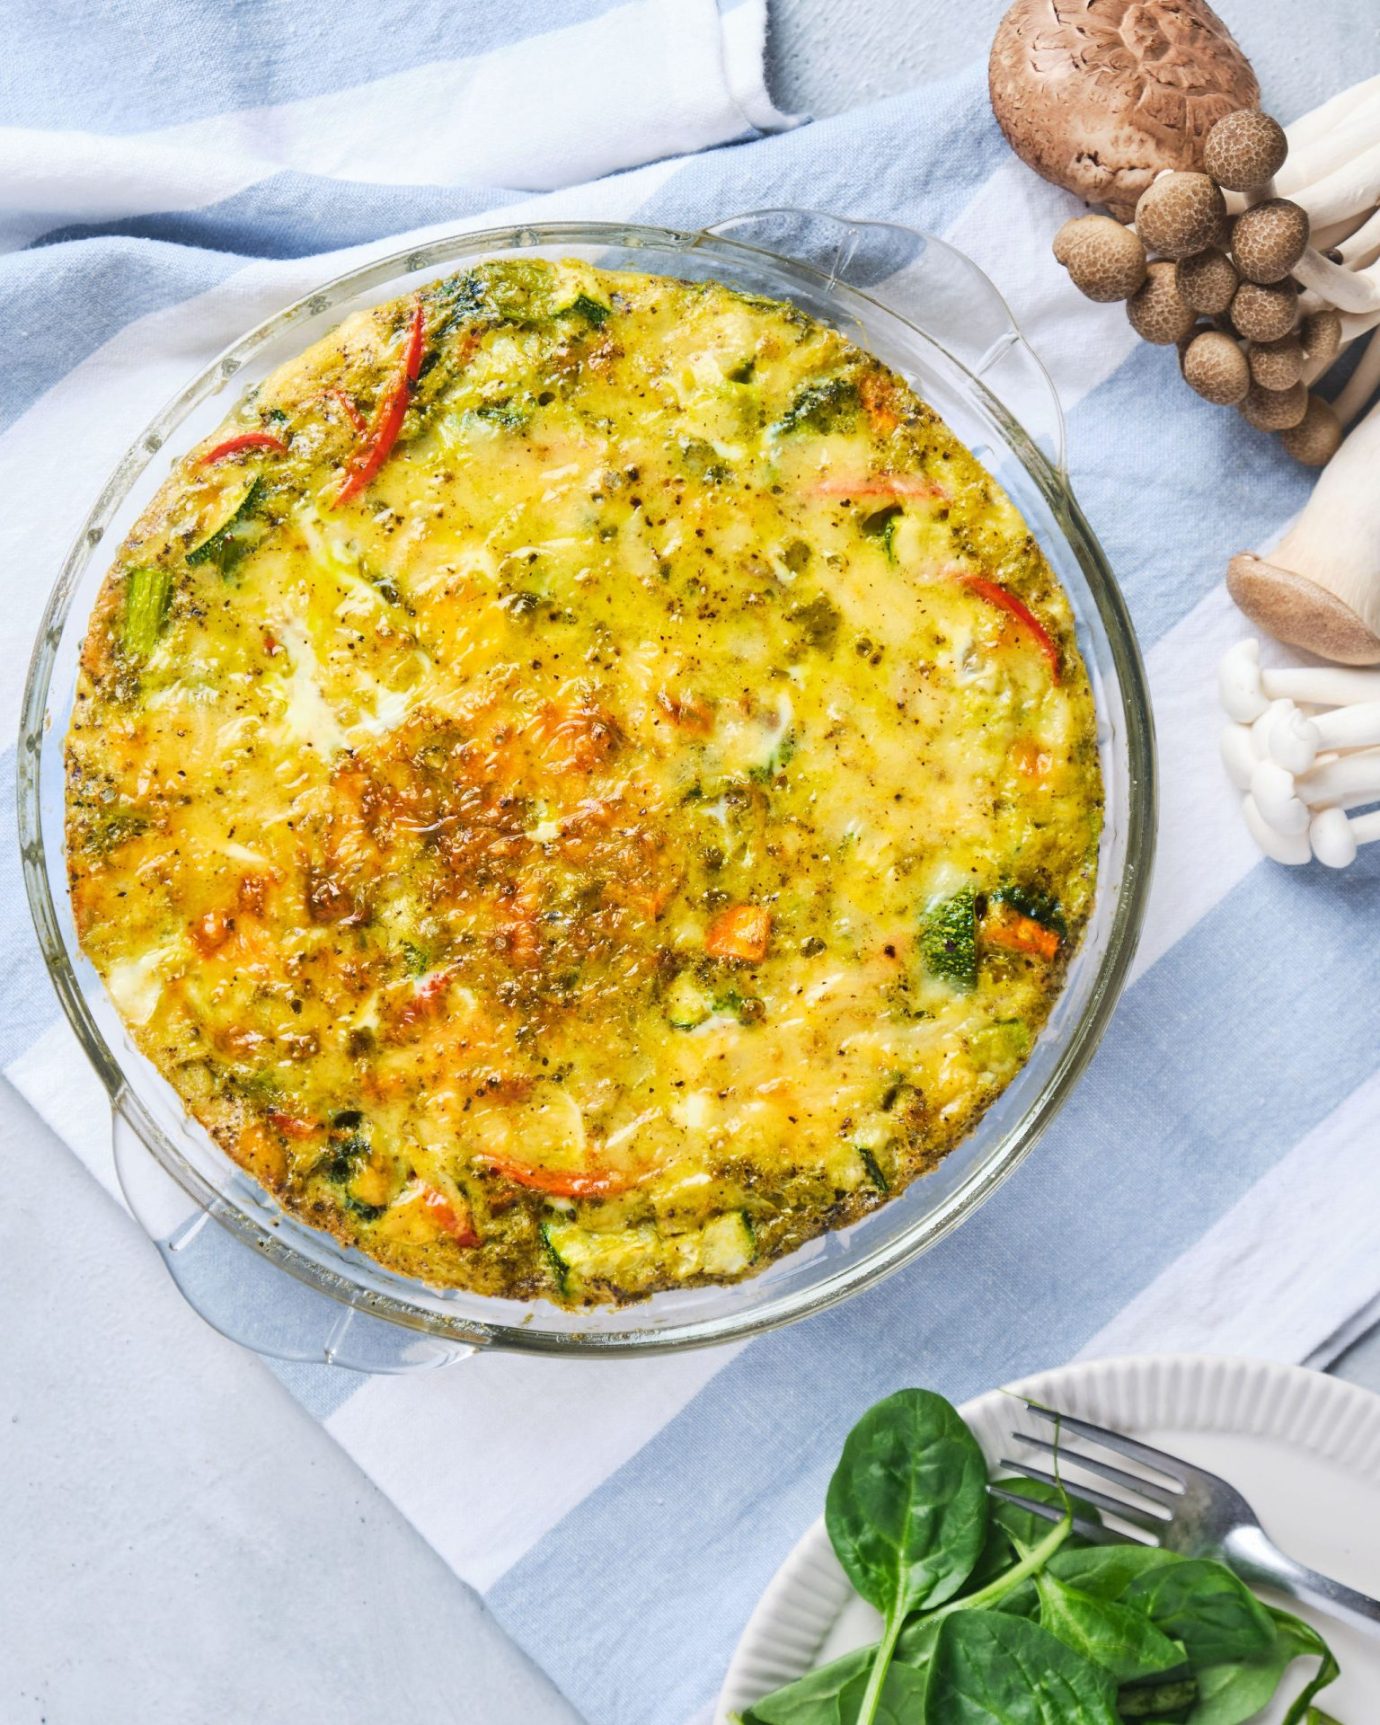 image of a pesto vegetable frittata topped with melted cheese